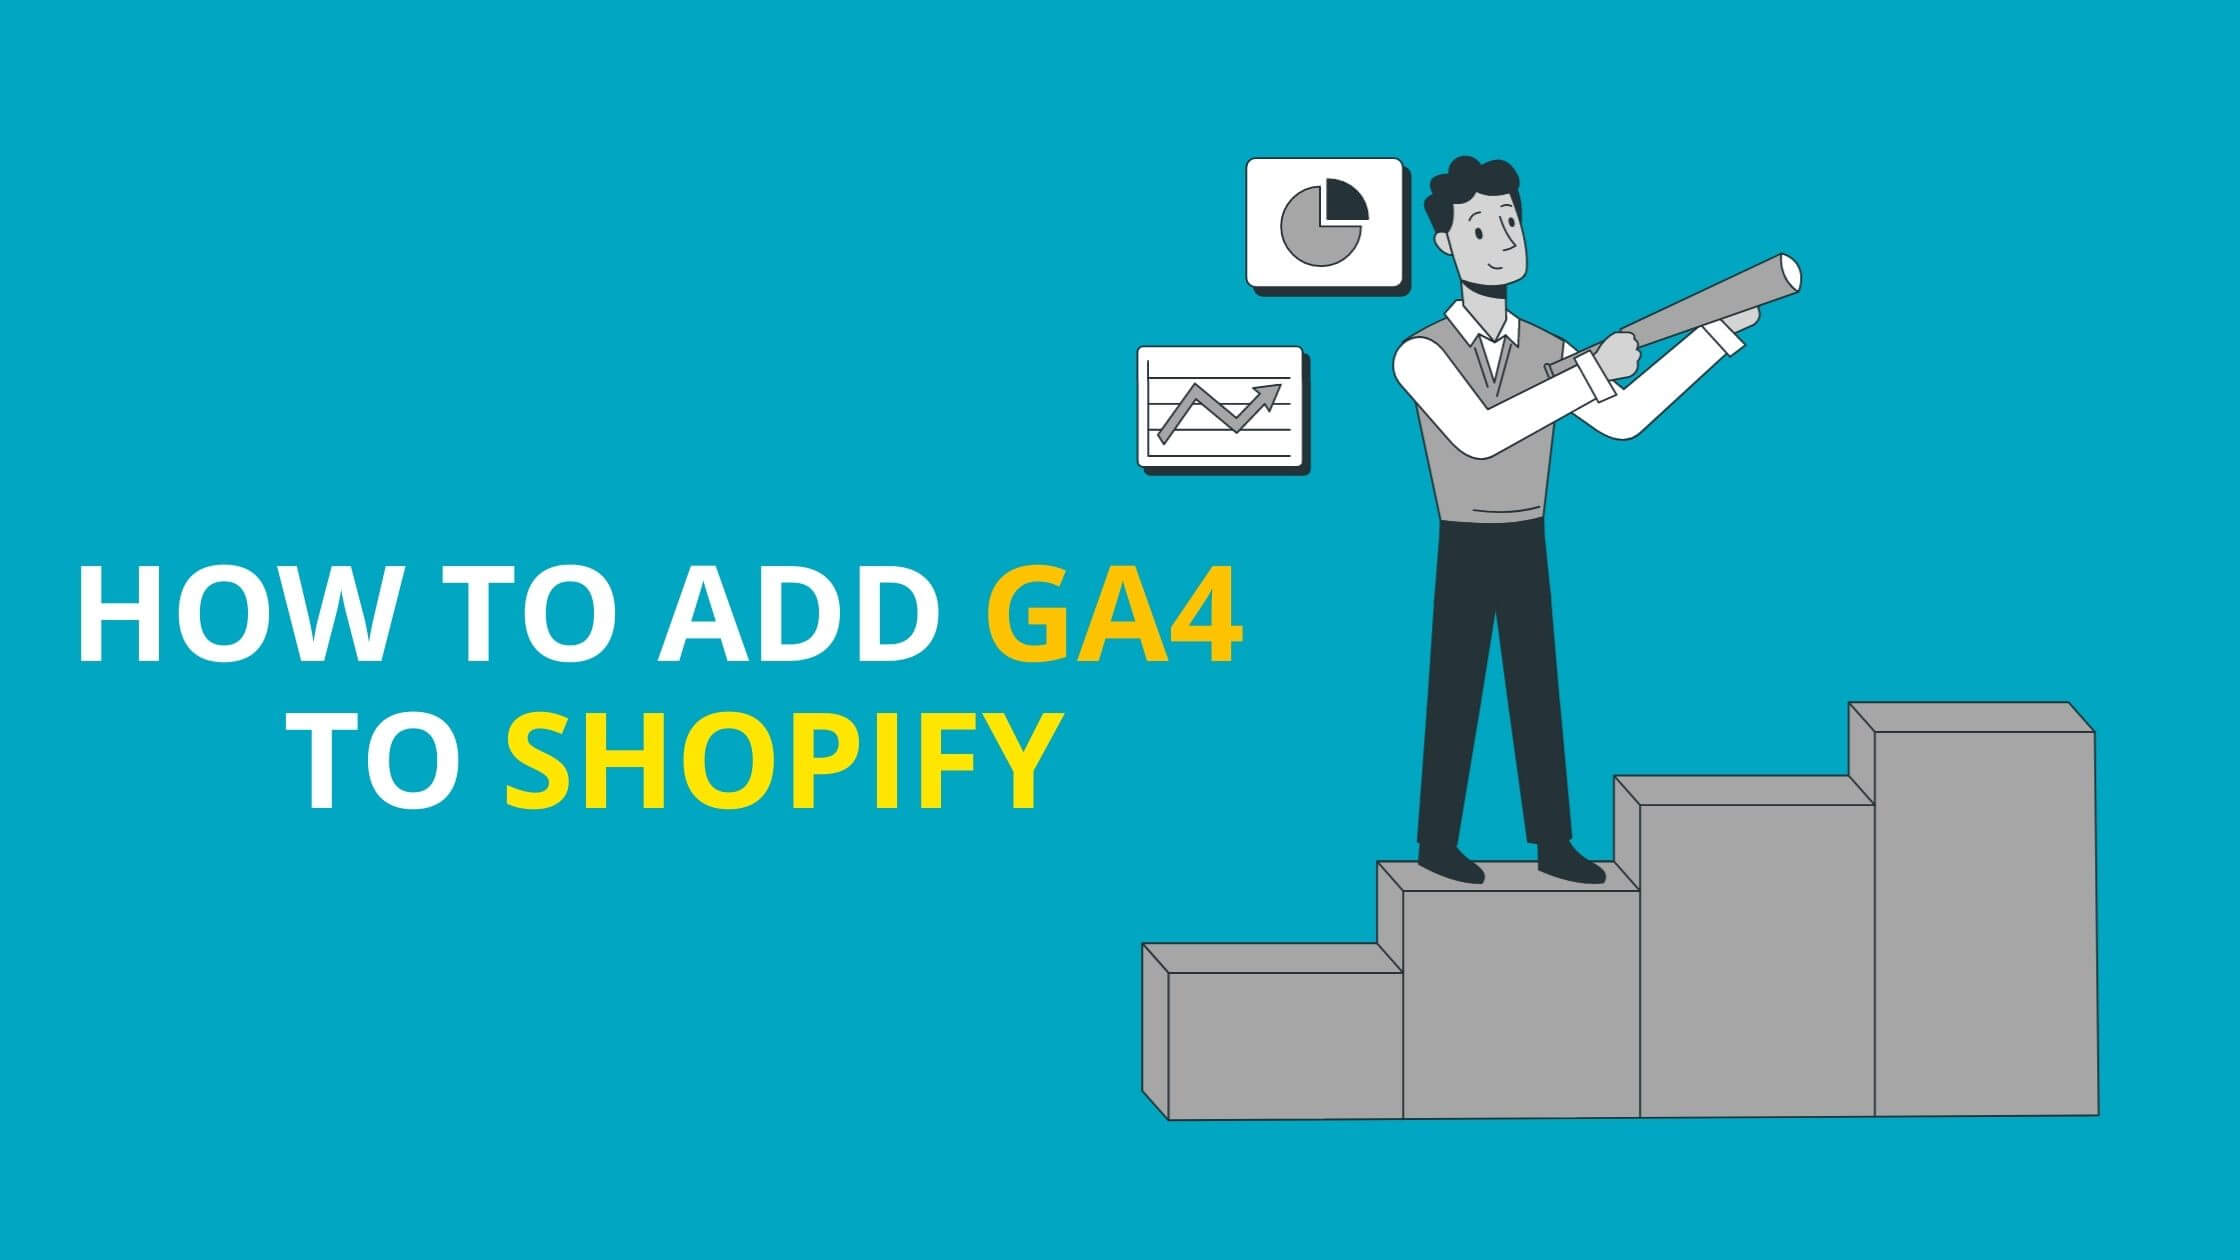 How to Add GA4 to Shopify